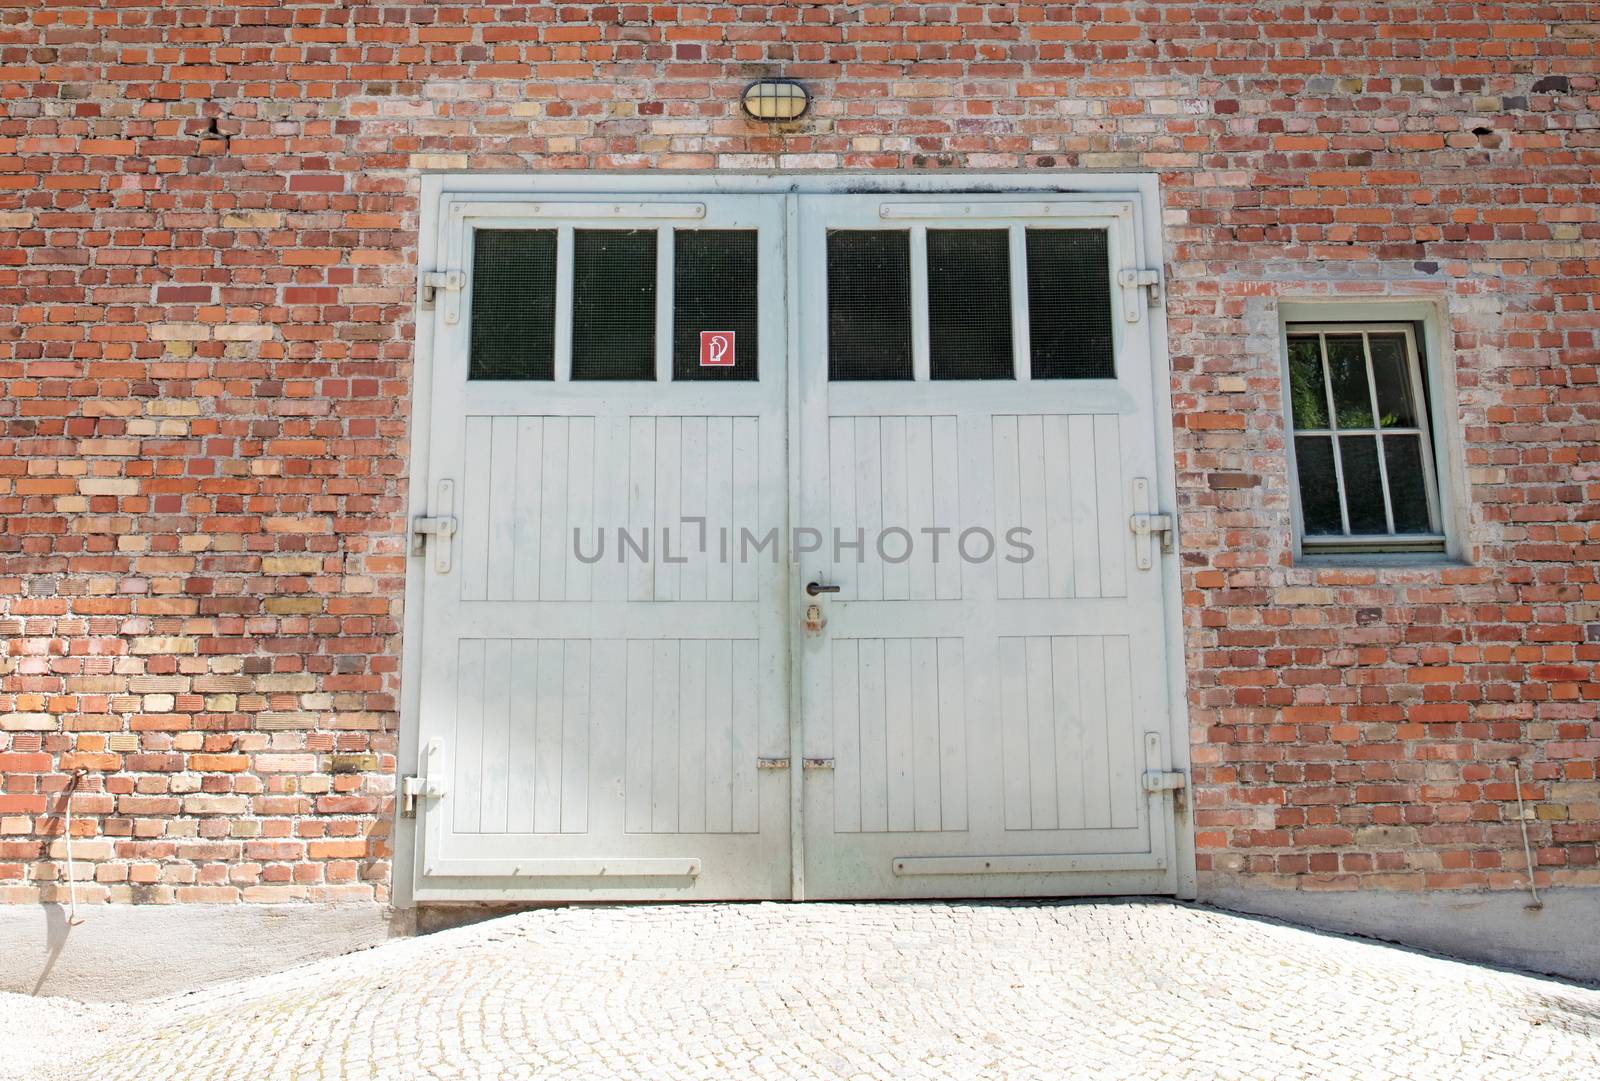 Dachau, Bavaria, Germany - July 13, 2020: Building of the crematoriums and gas chamber of the concentration camp of Dachau